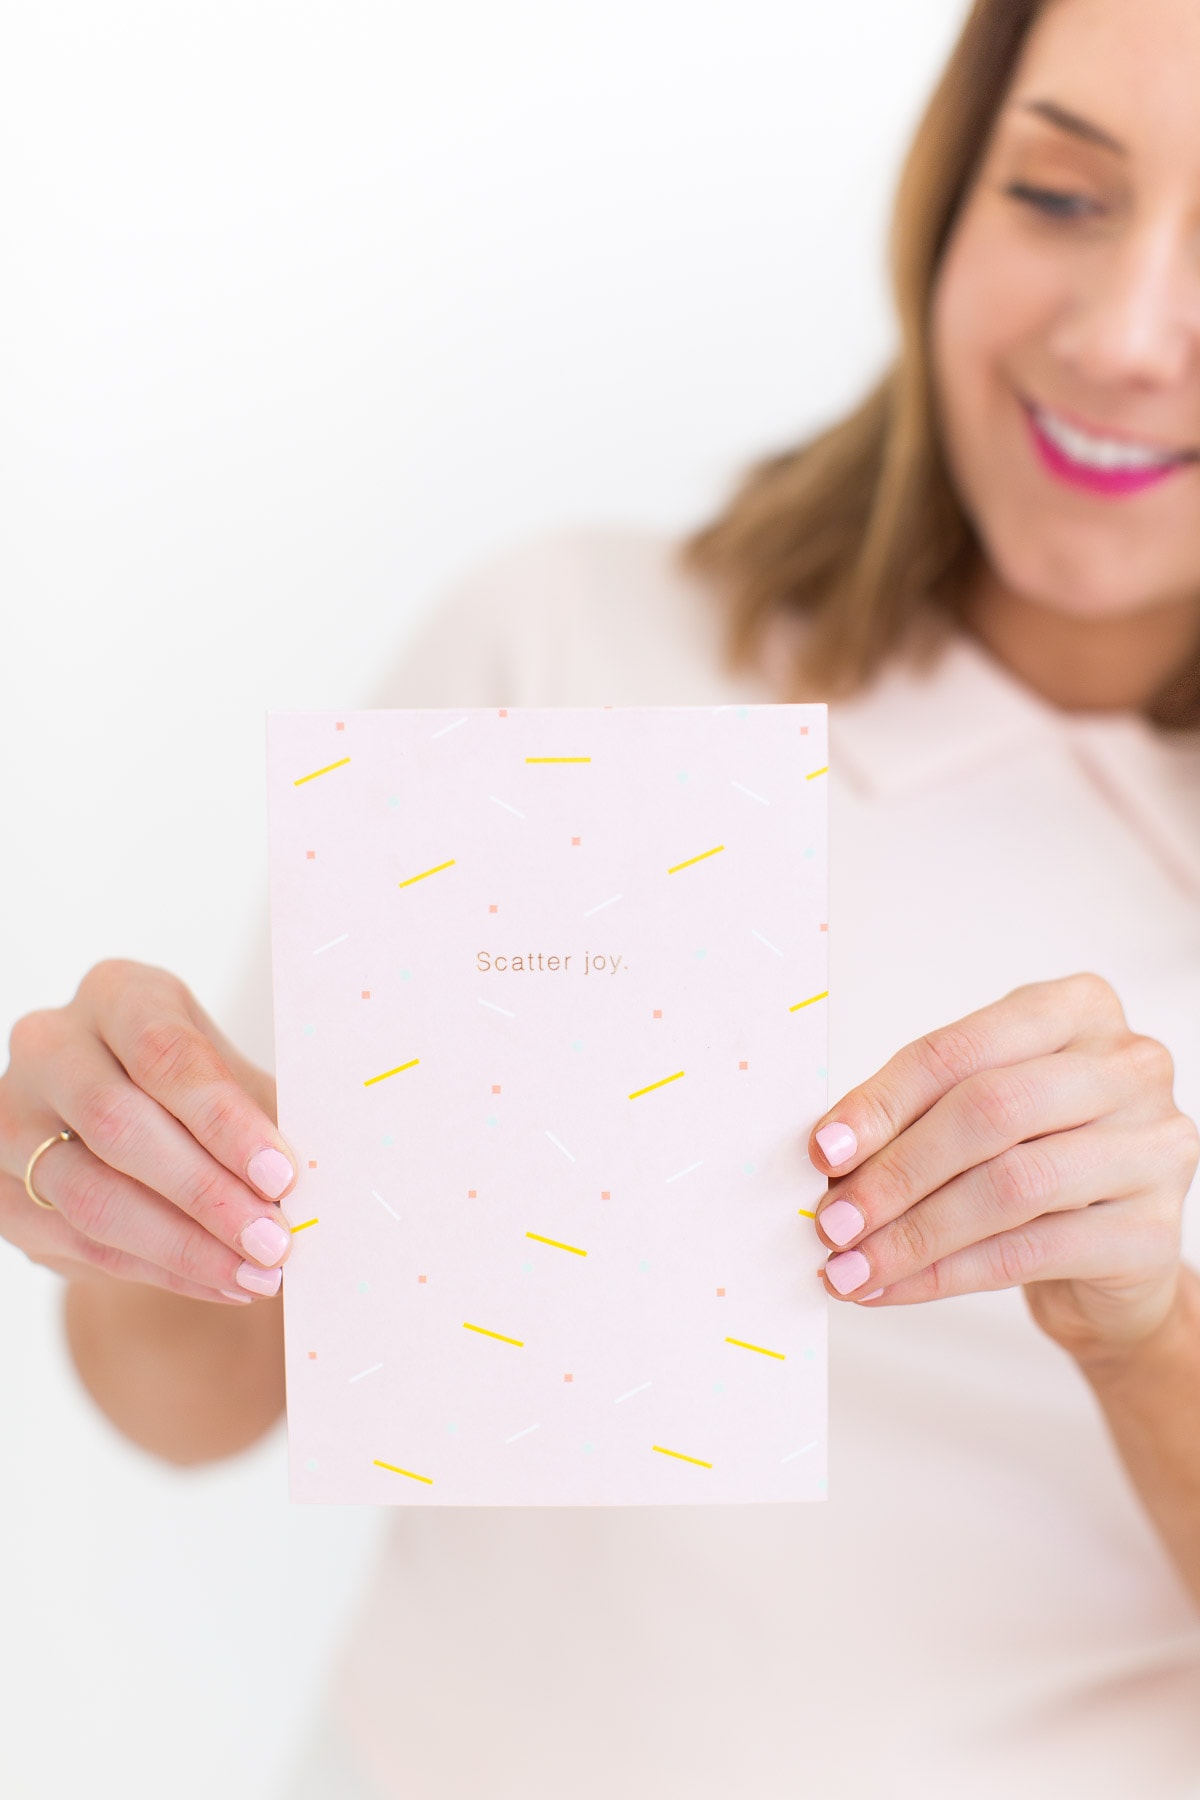 We're so excited to announce our line of Sugar & Cloth Mother's Day Signature cards for Hallmark! - Ashley Rose - Houston Blogger